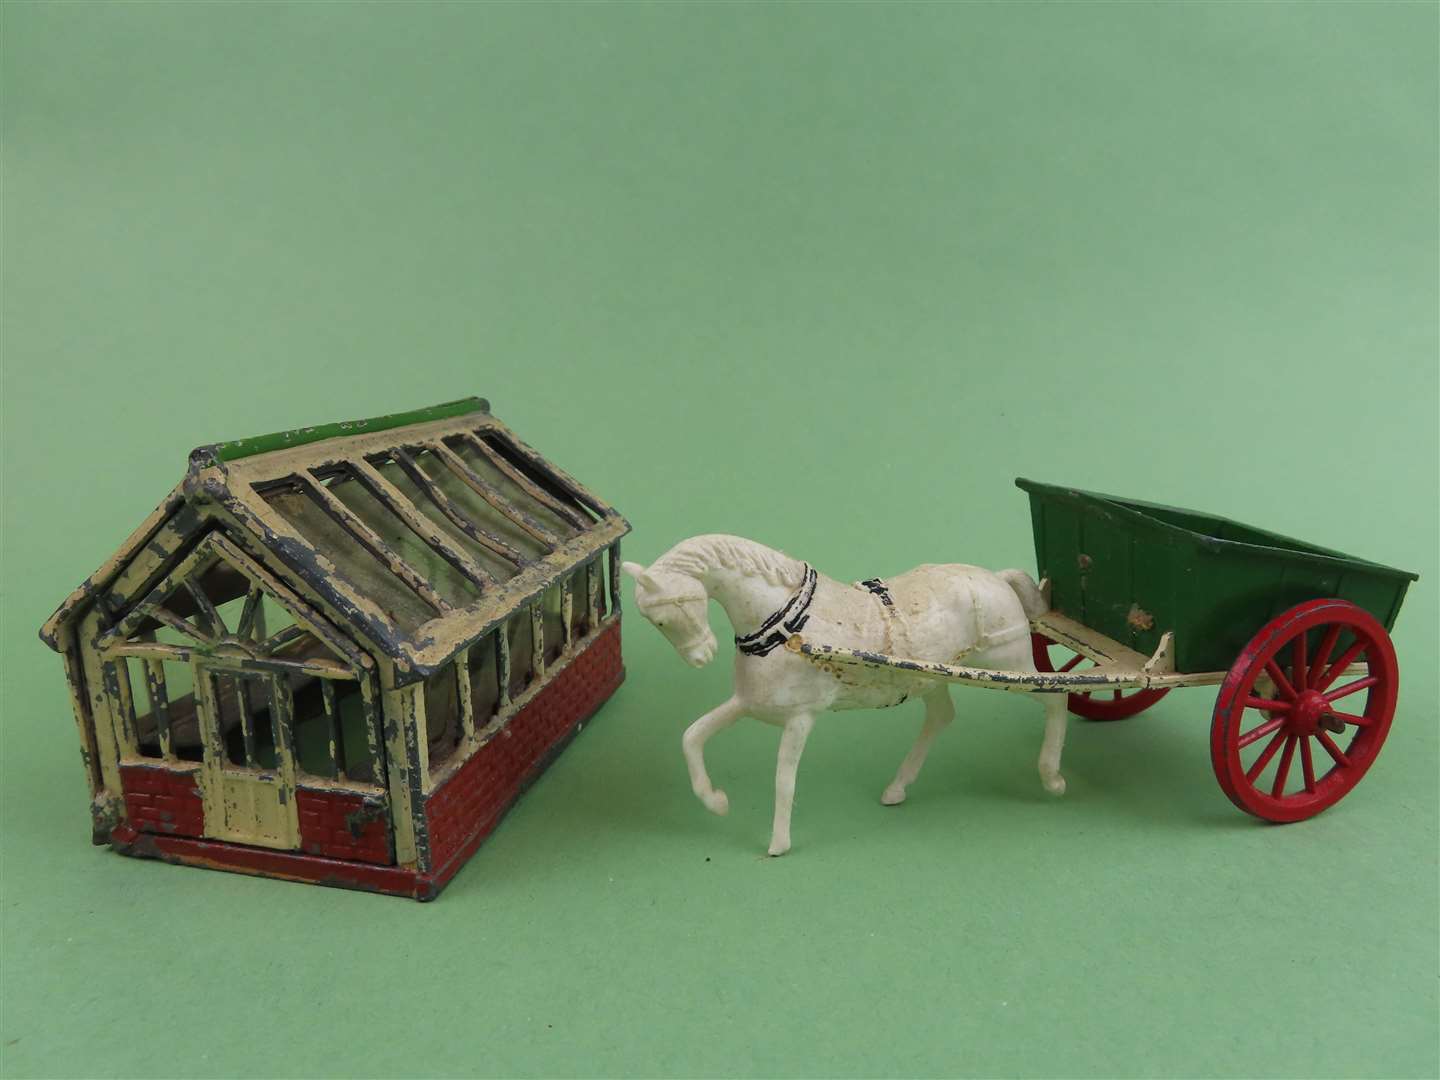 Which old toys did you have as a child? Some of the toys of Christmas past which will be on display.